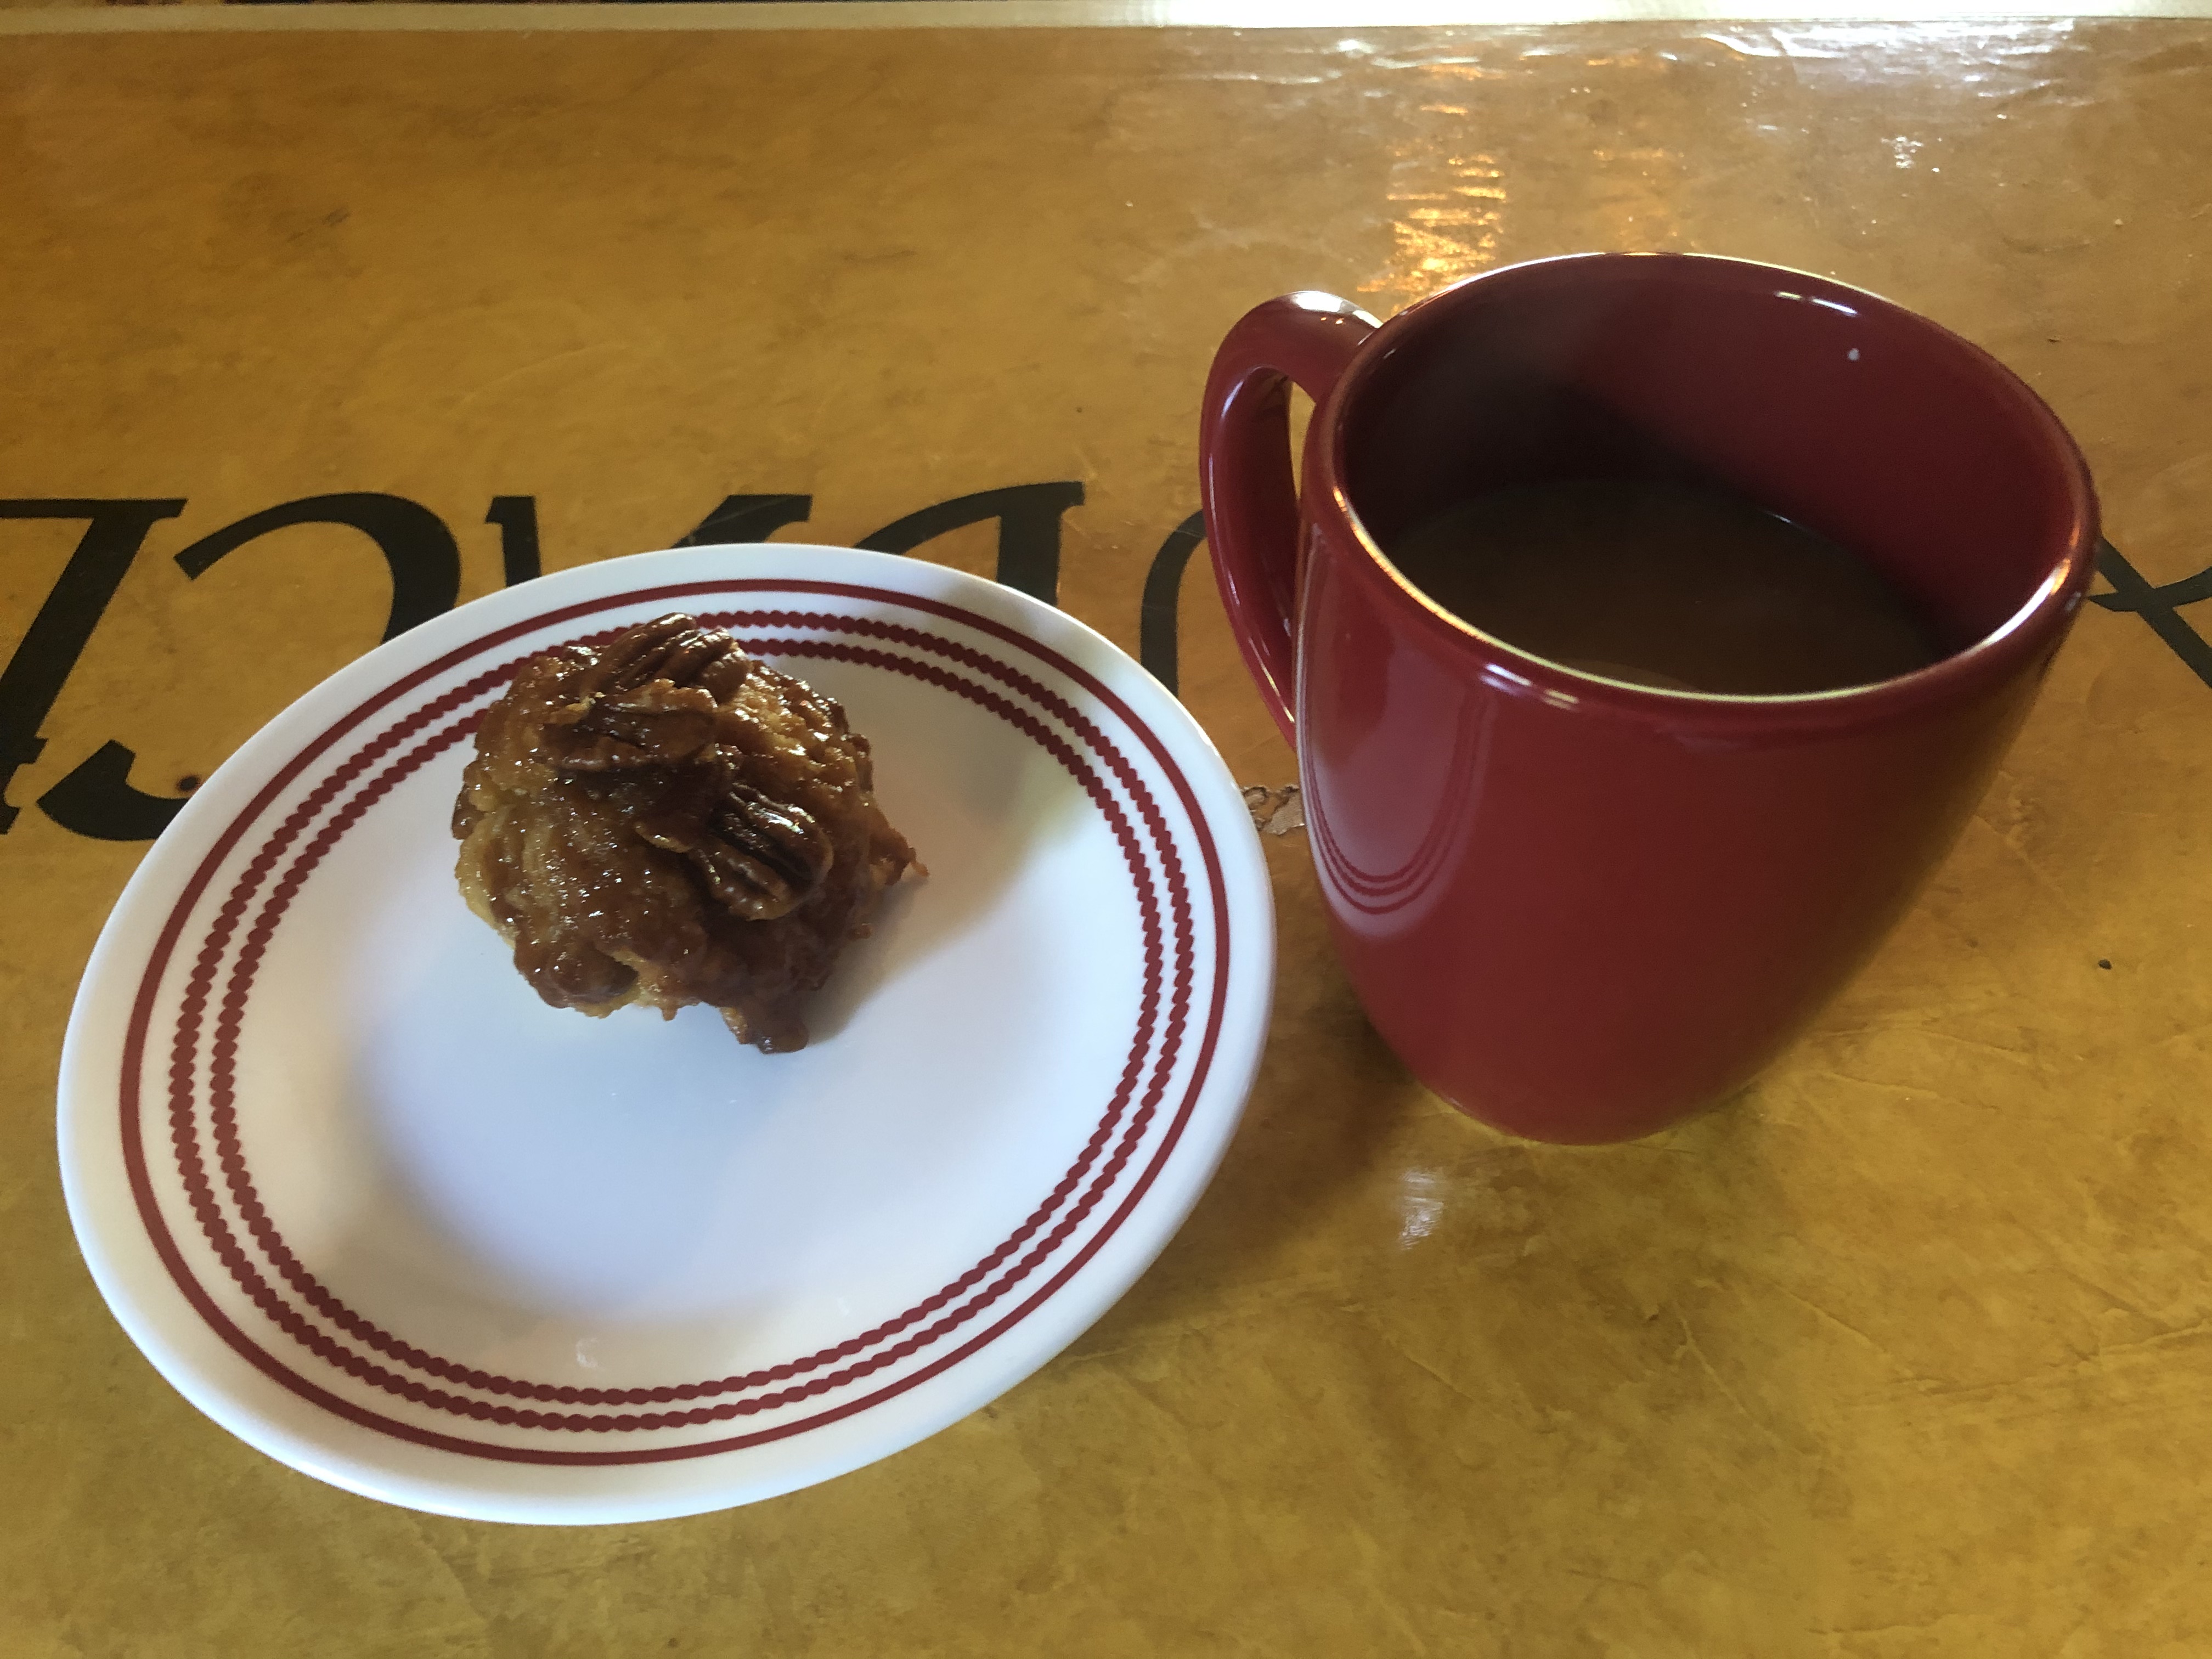 sticky bun on plate with coffee cup